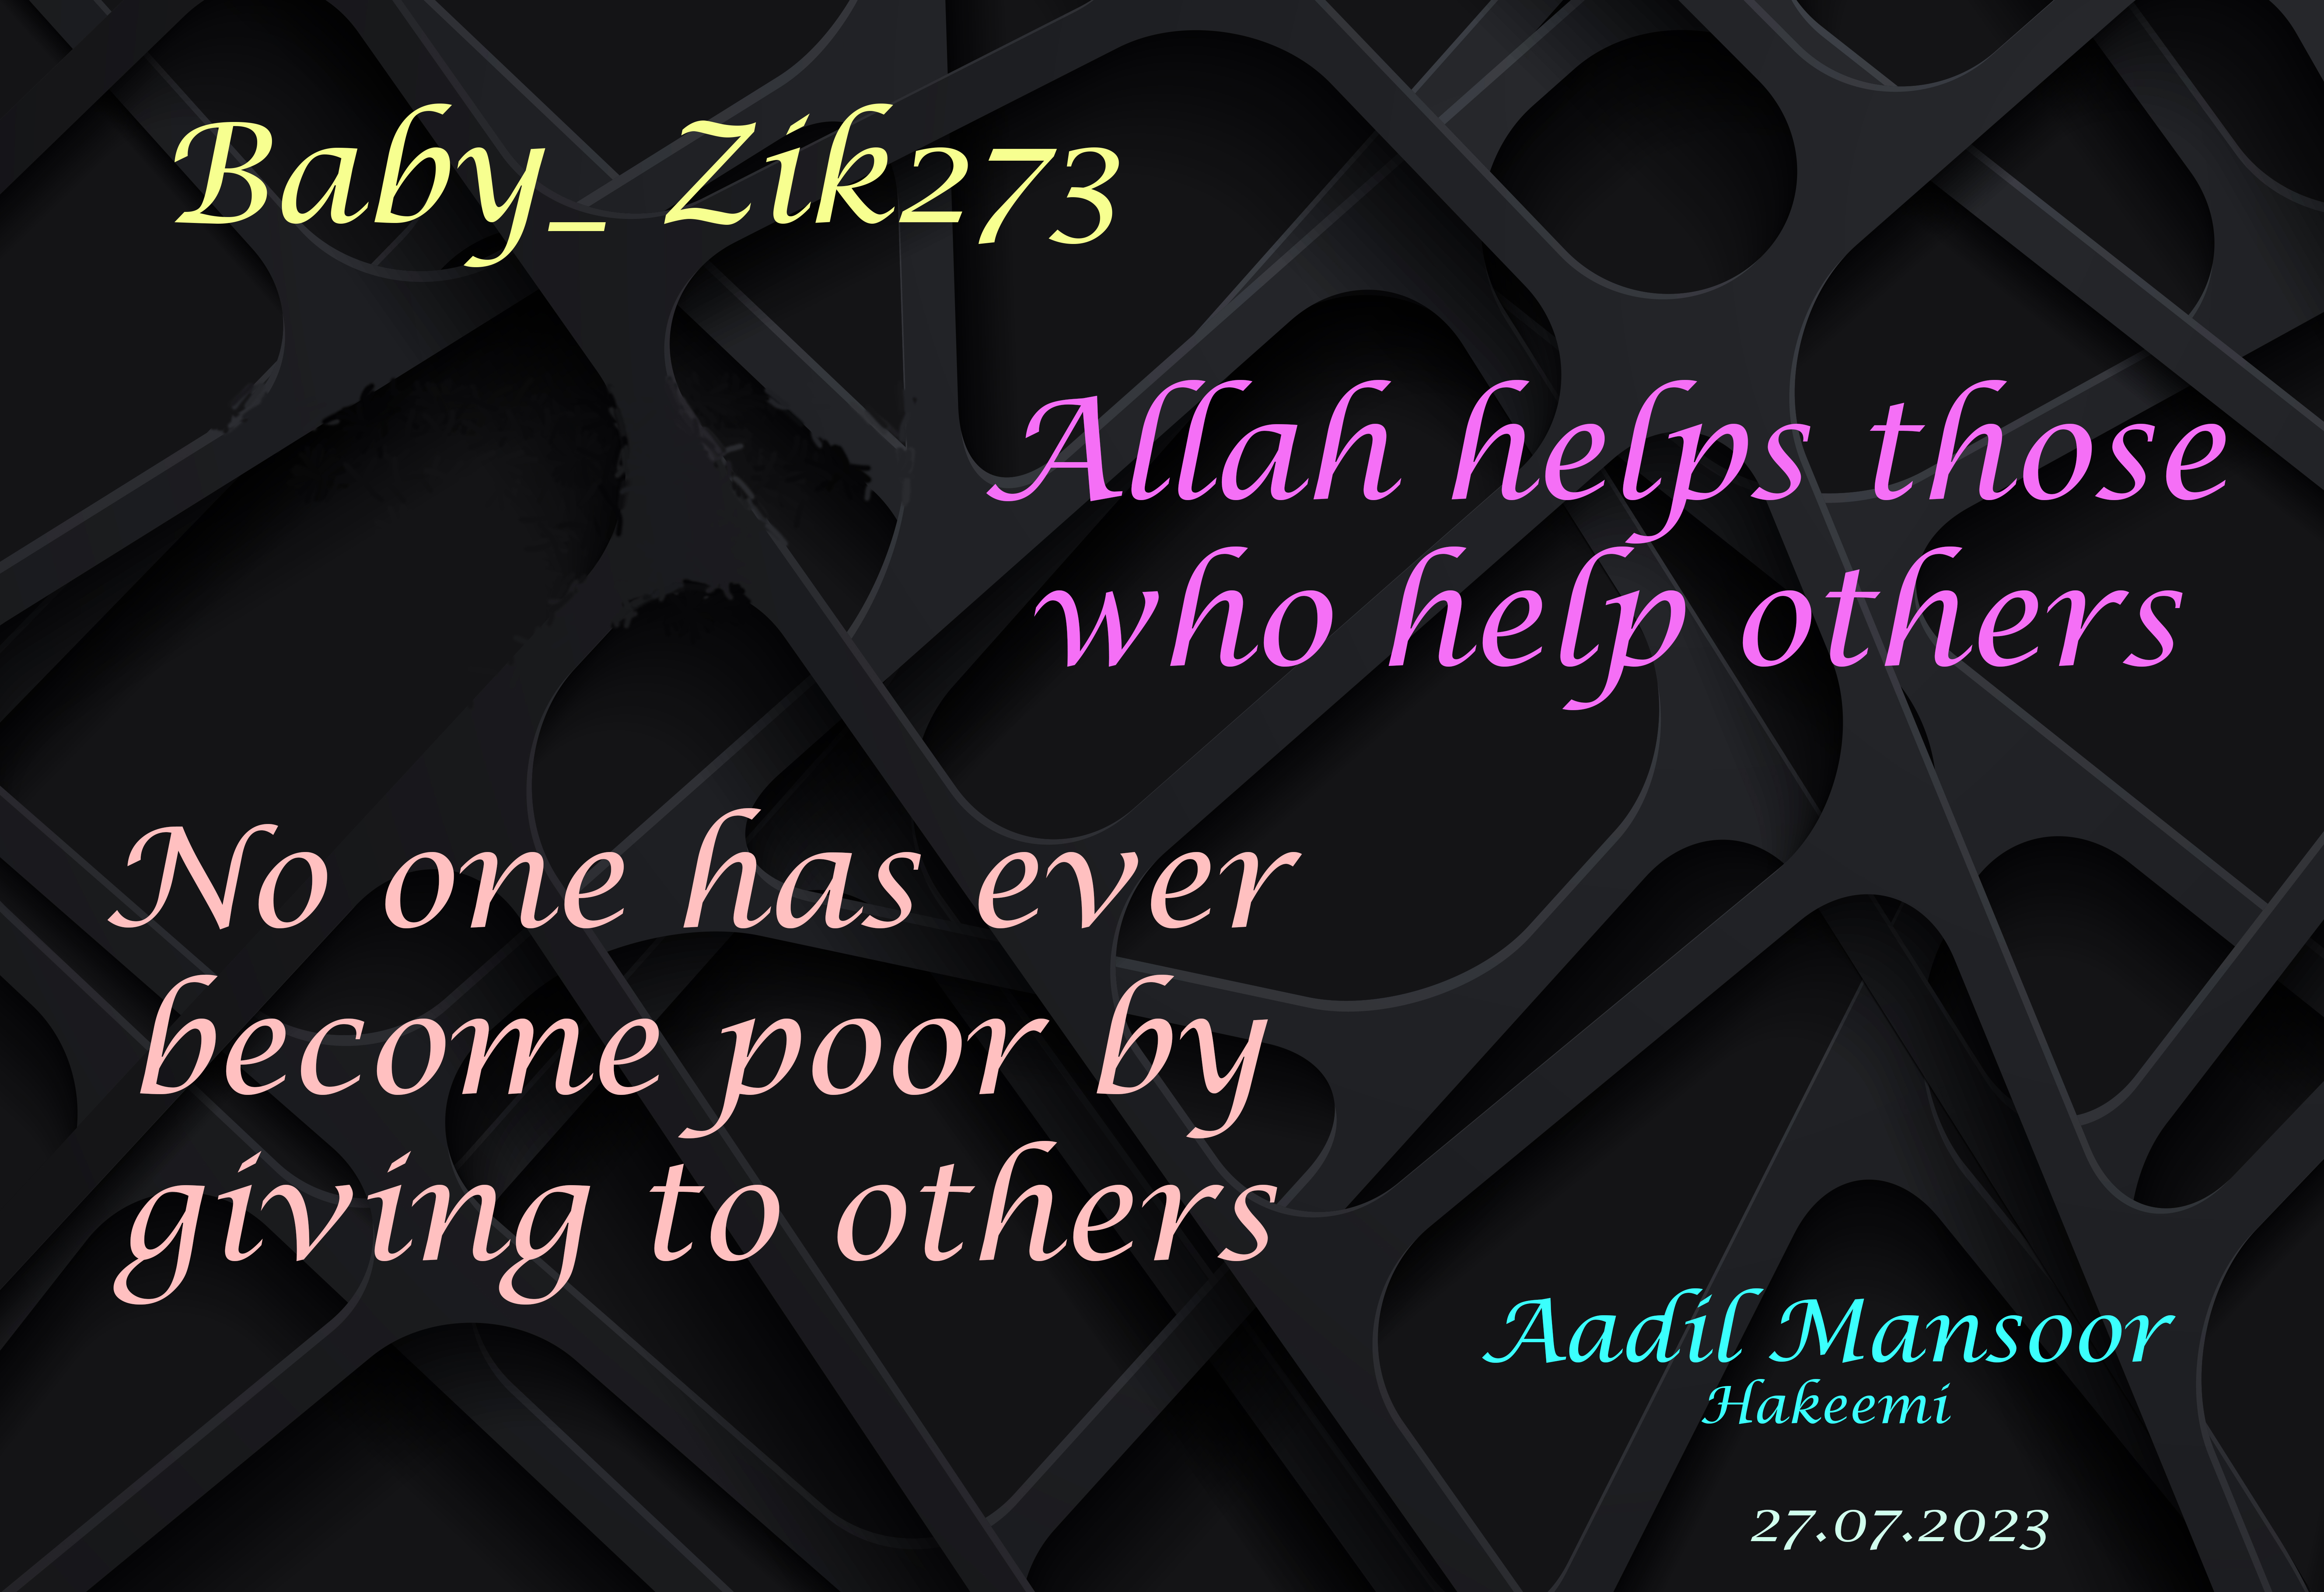 Baby_ Zikz273

Allah helps those
who help others

No one has ever
become poor by

giving to others

Aadil Mansoor
Hakeemi

27.07.2023